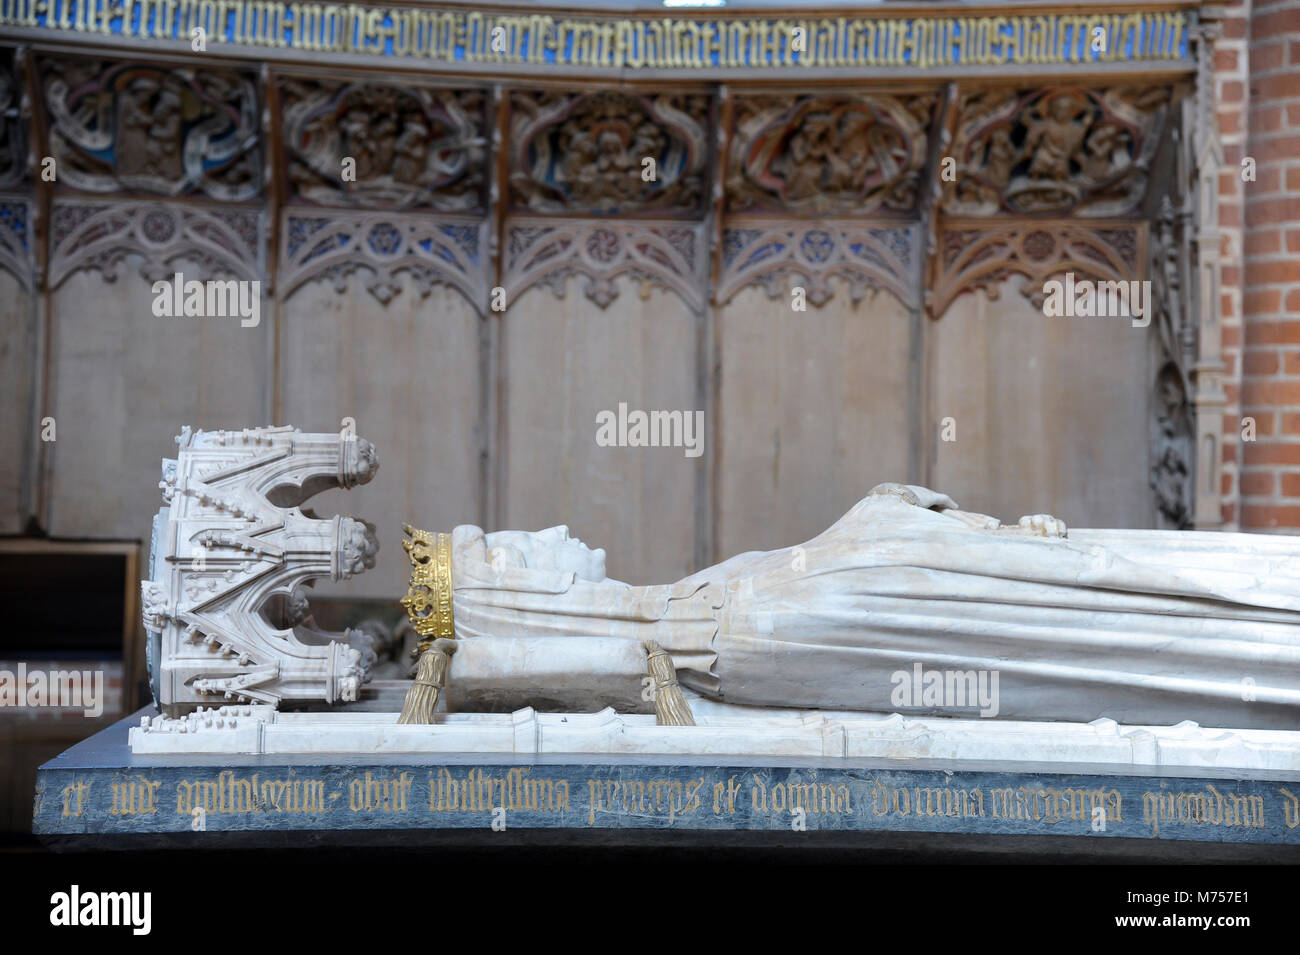 Sarcophagus of Queen Margrethe I, the founder and first ruler of kingdoms of Denmark, Sweden and Norway after personal union called Kalmar Union, behi Stock Photo